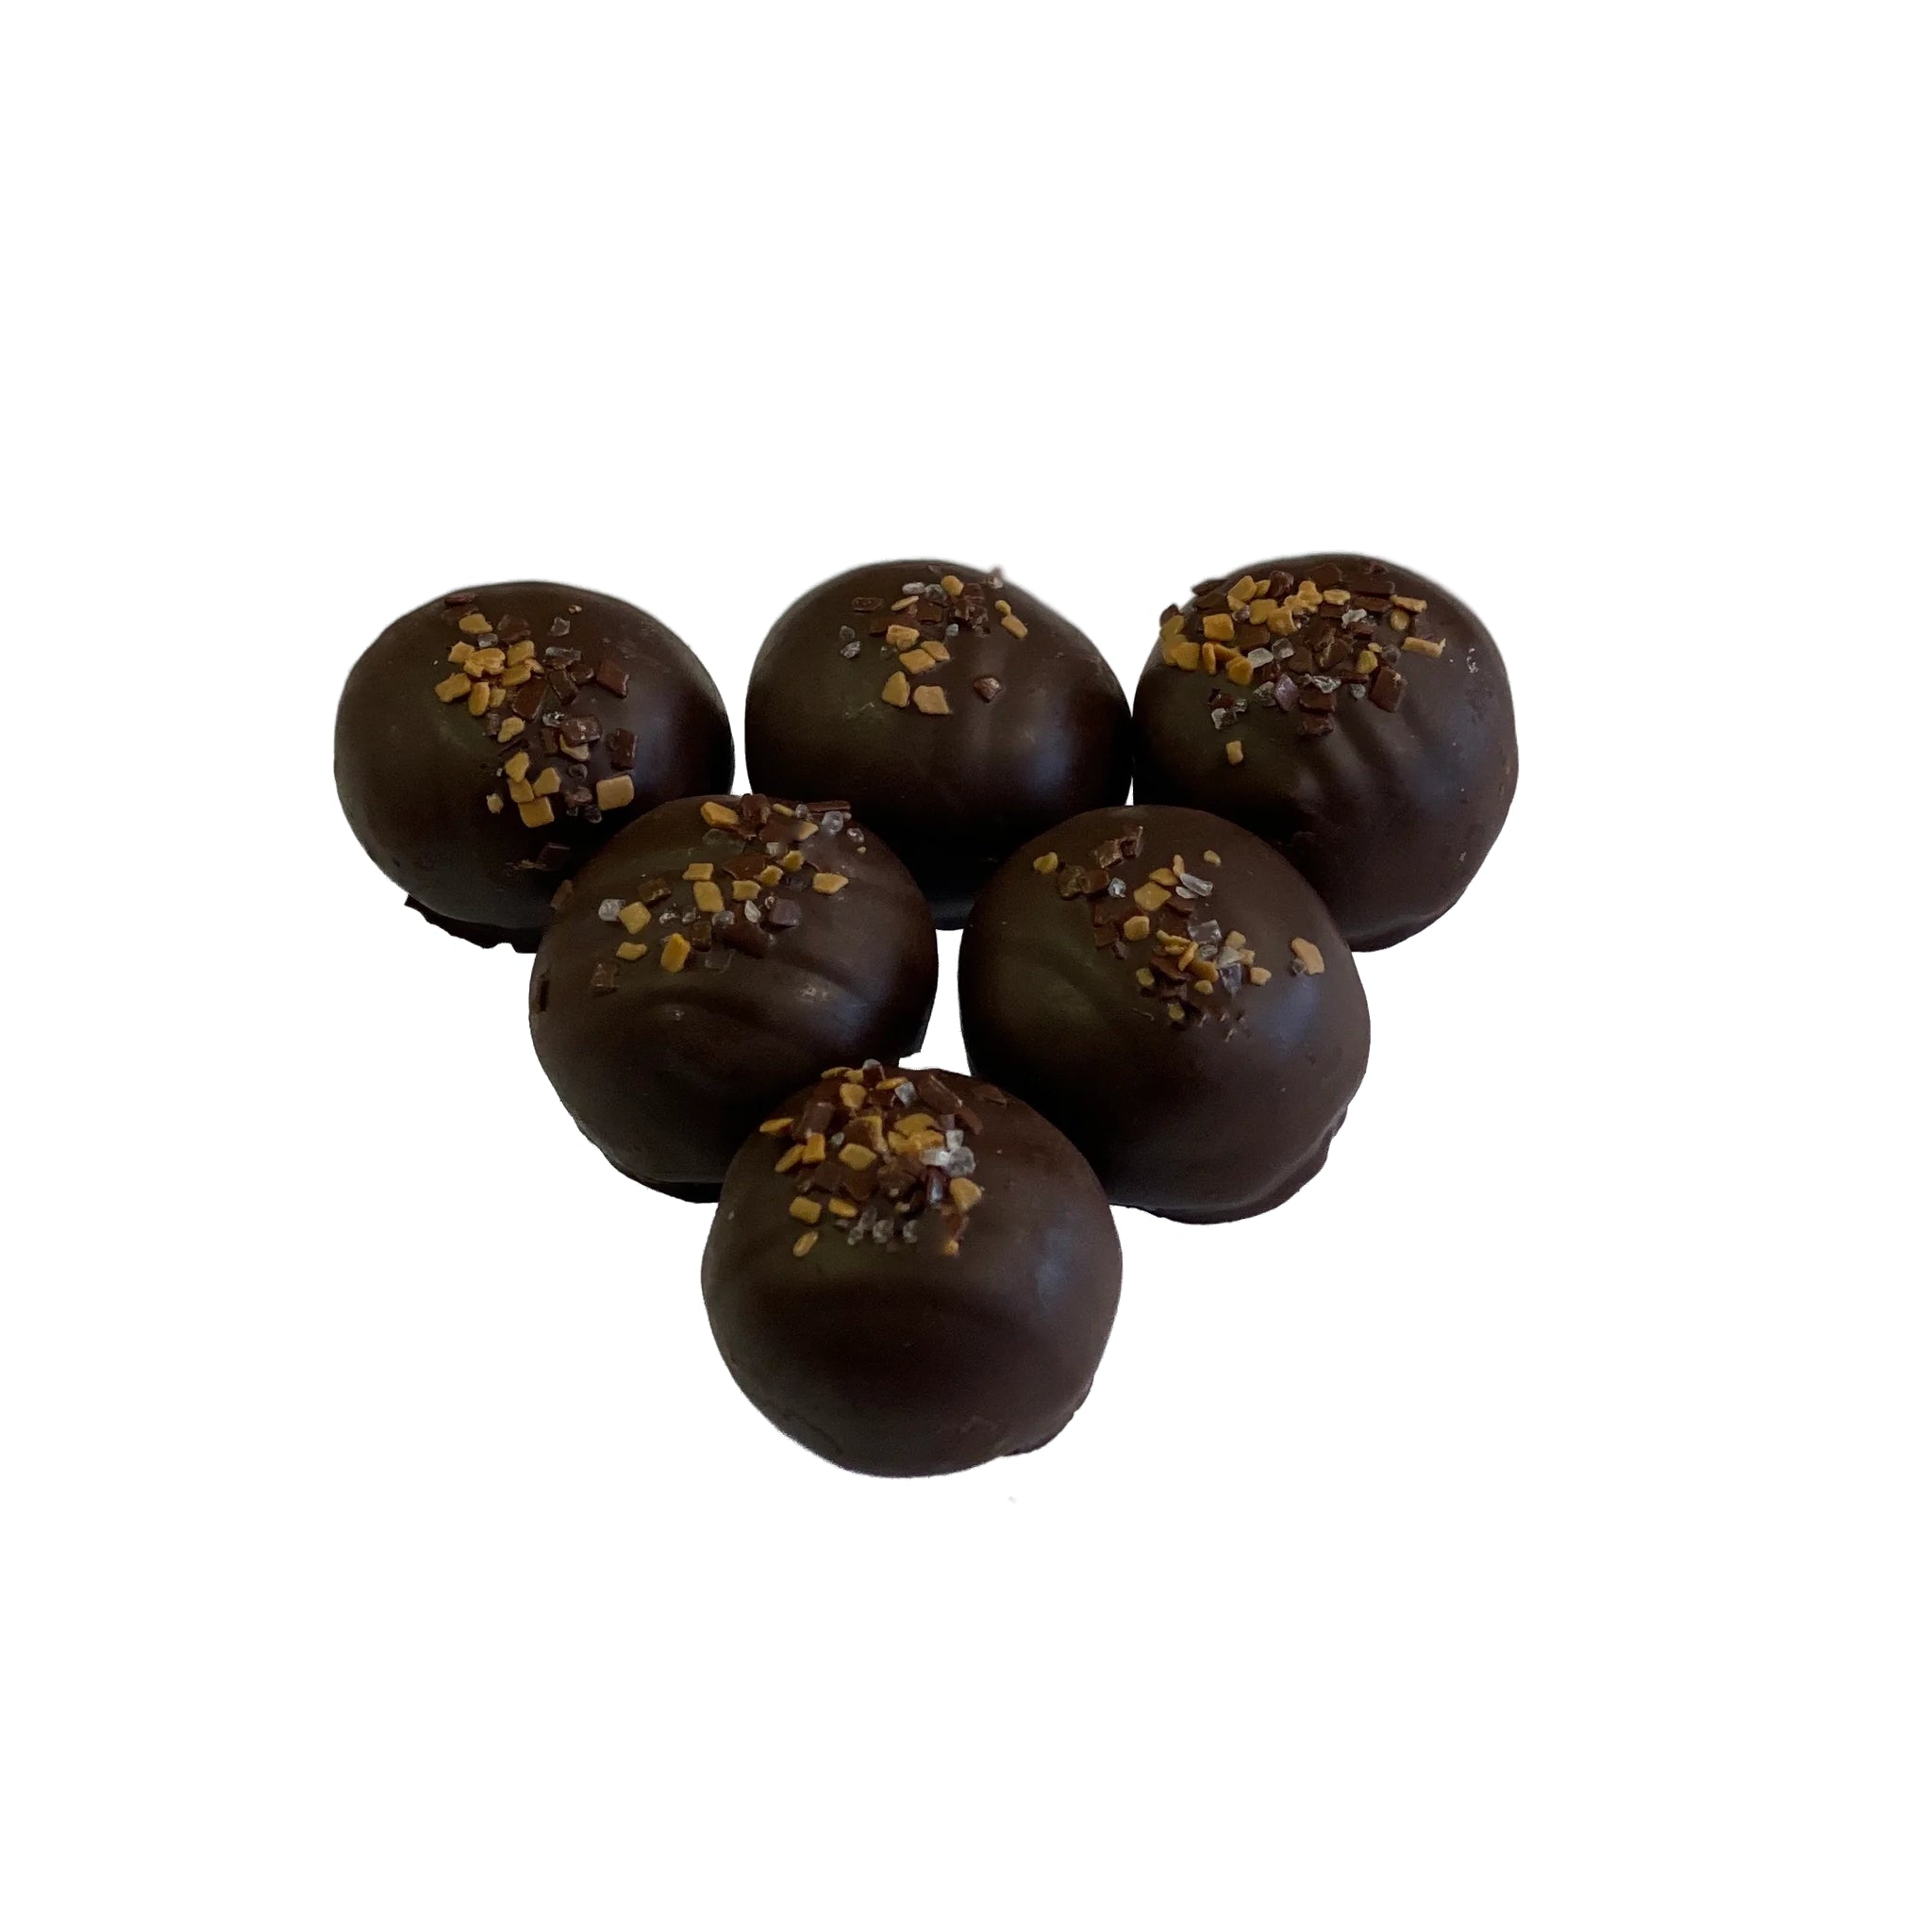 Large Marble Size Dark Chocolate Ball with Sea Salt and Toffee sprinkles 